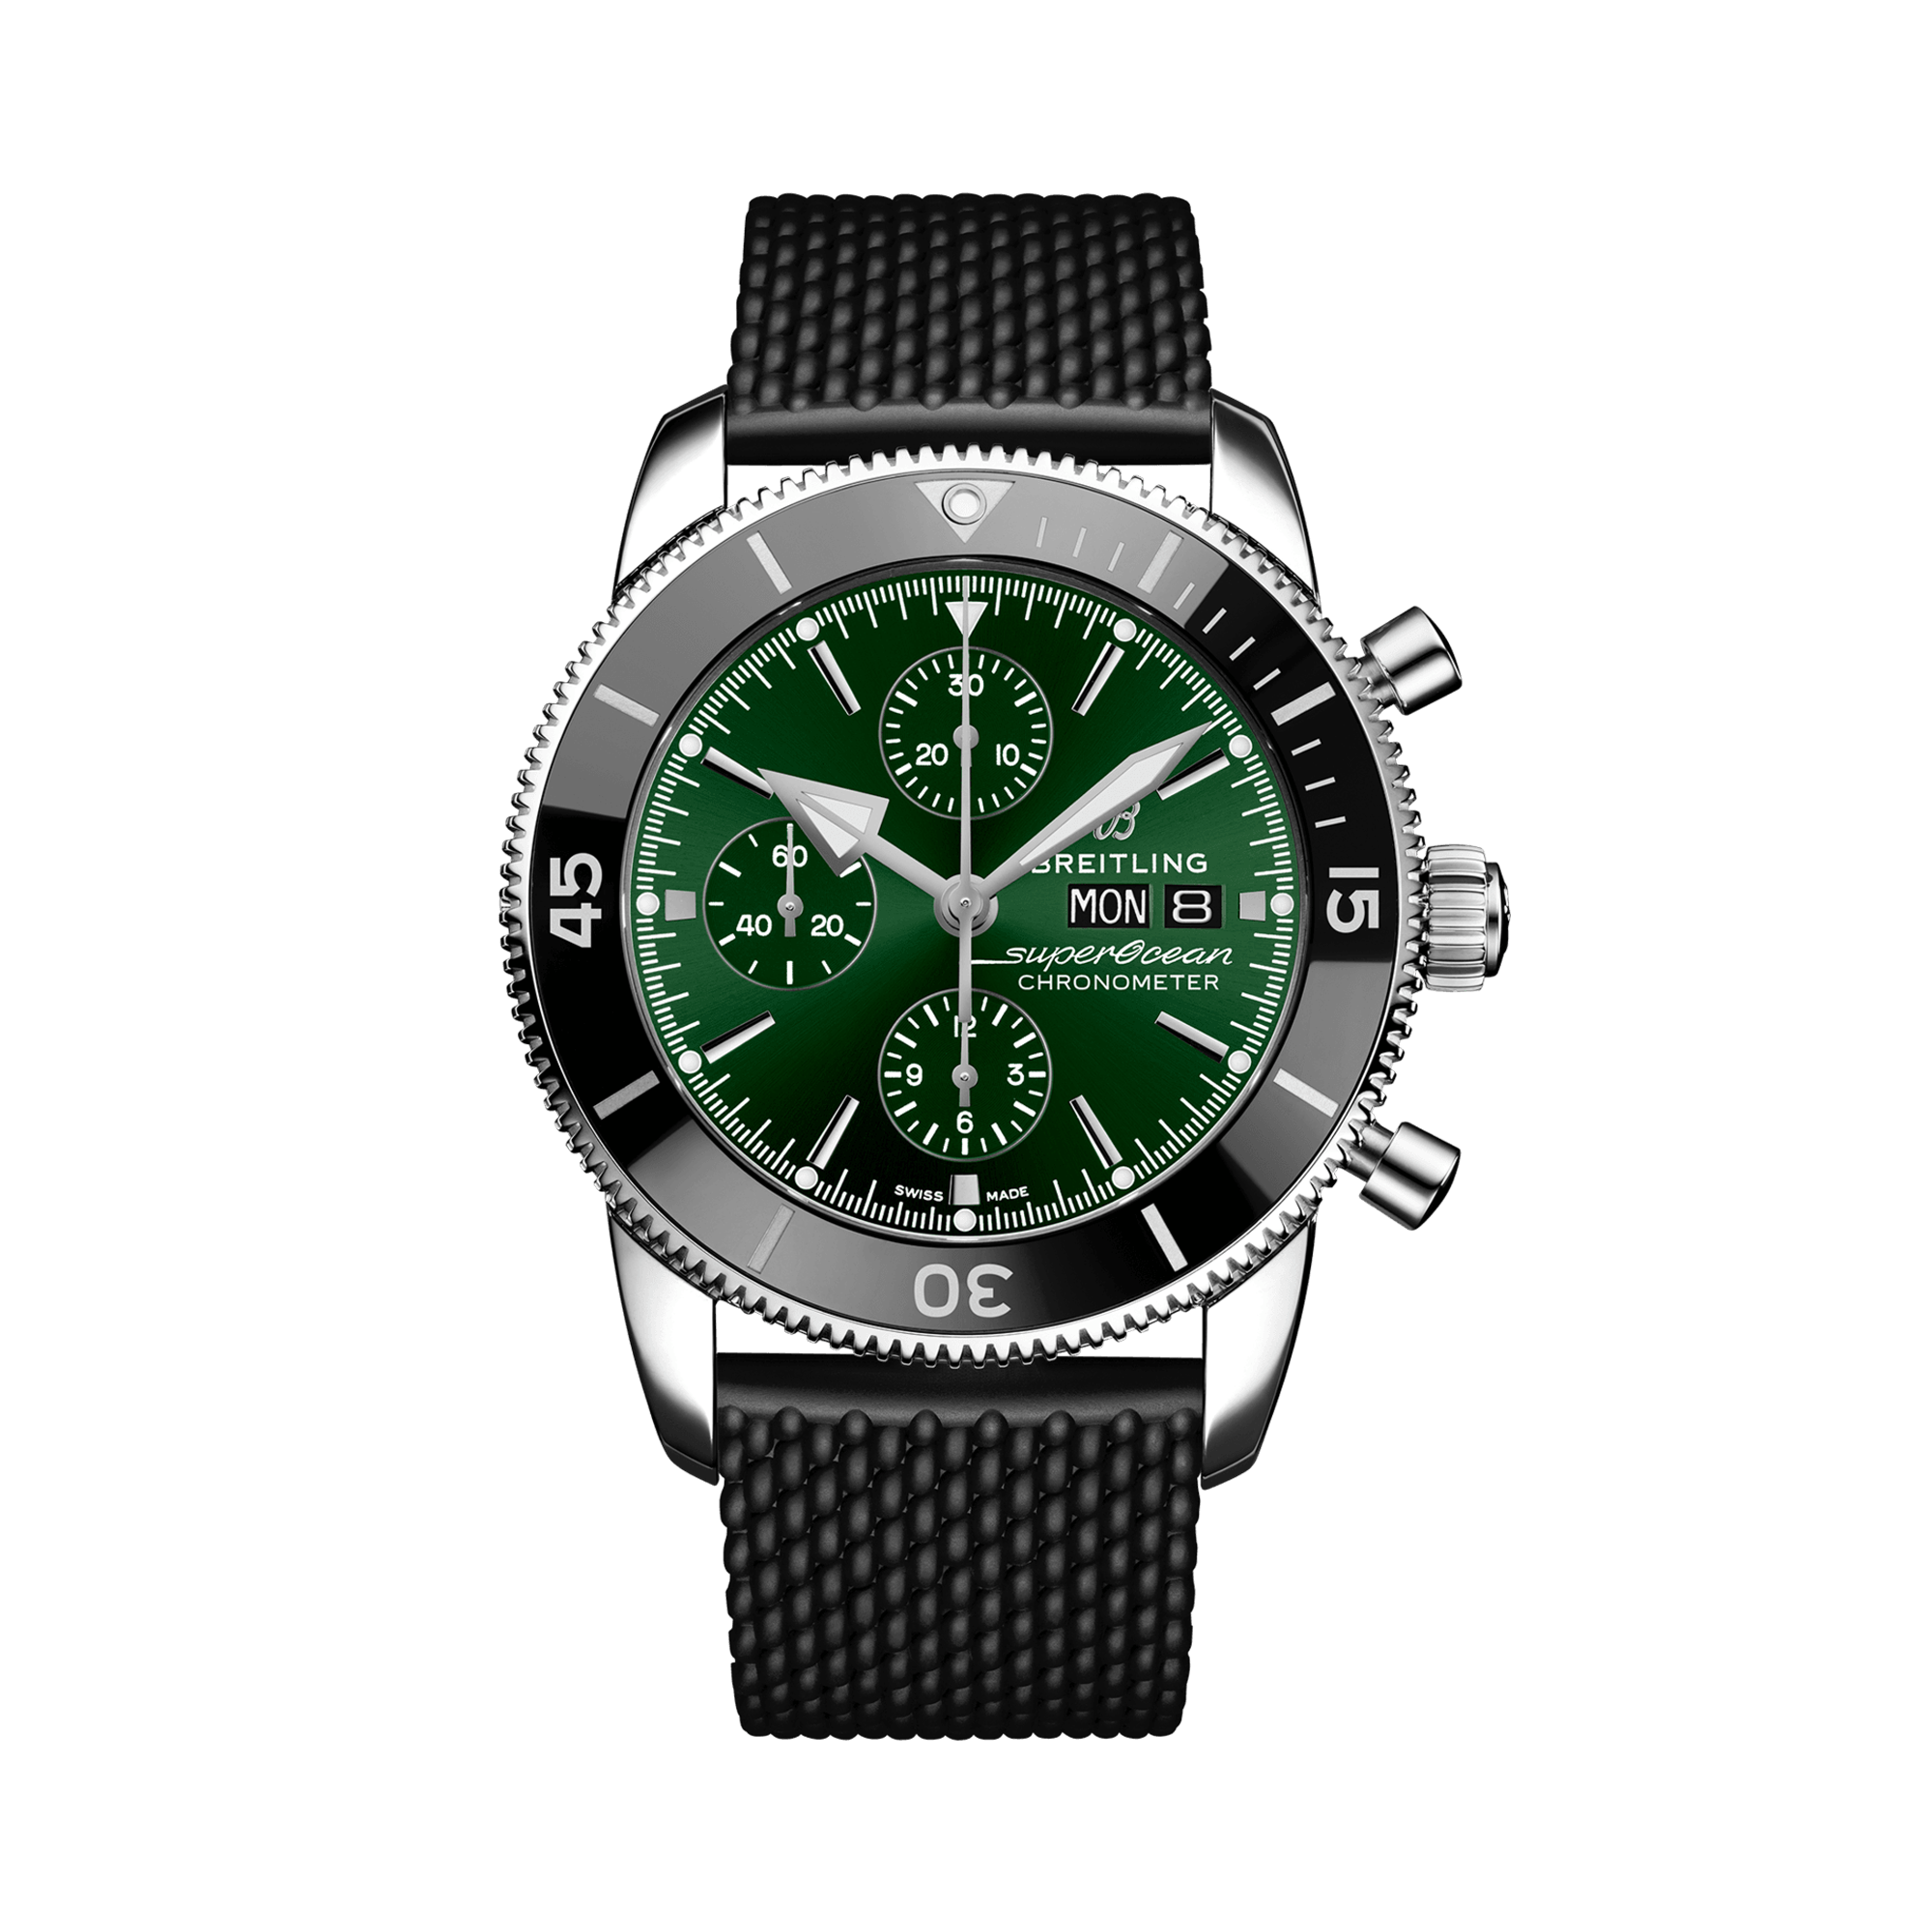 Breitling Superocean Heritage Chronograph 44 44mm, Green Dial, Baton Numeral_1